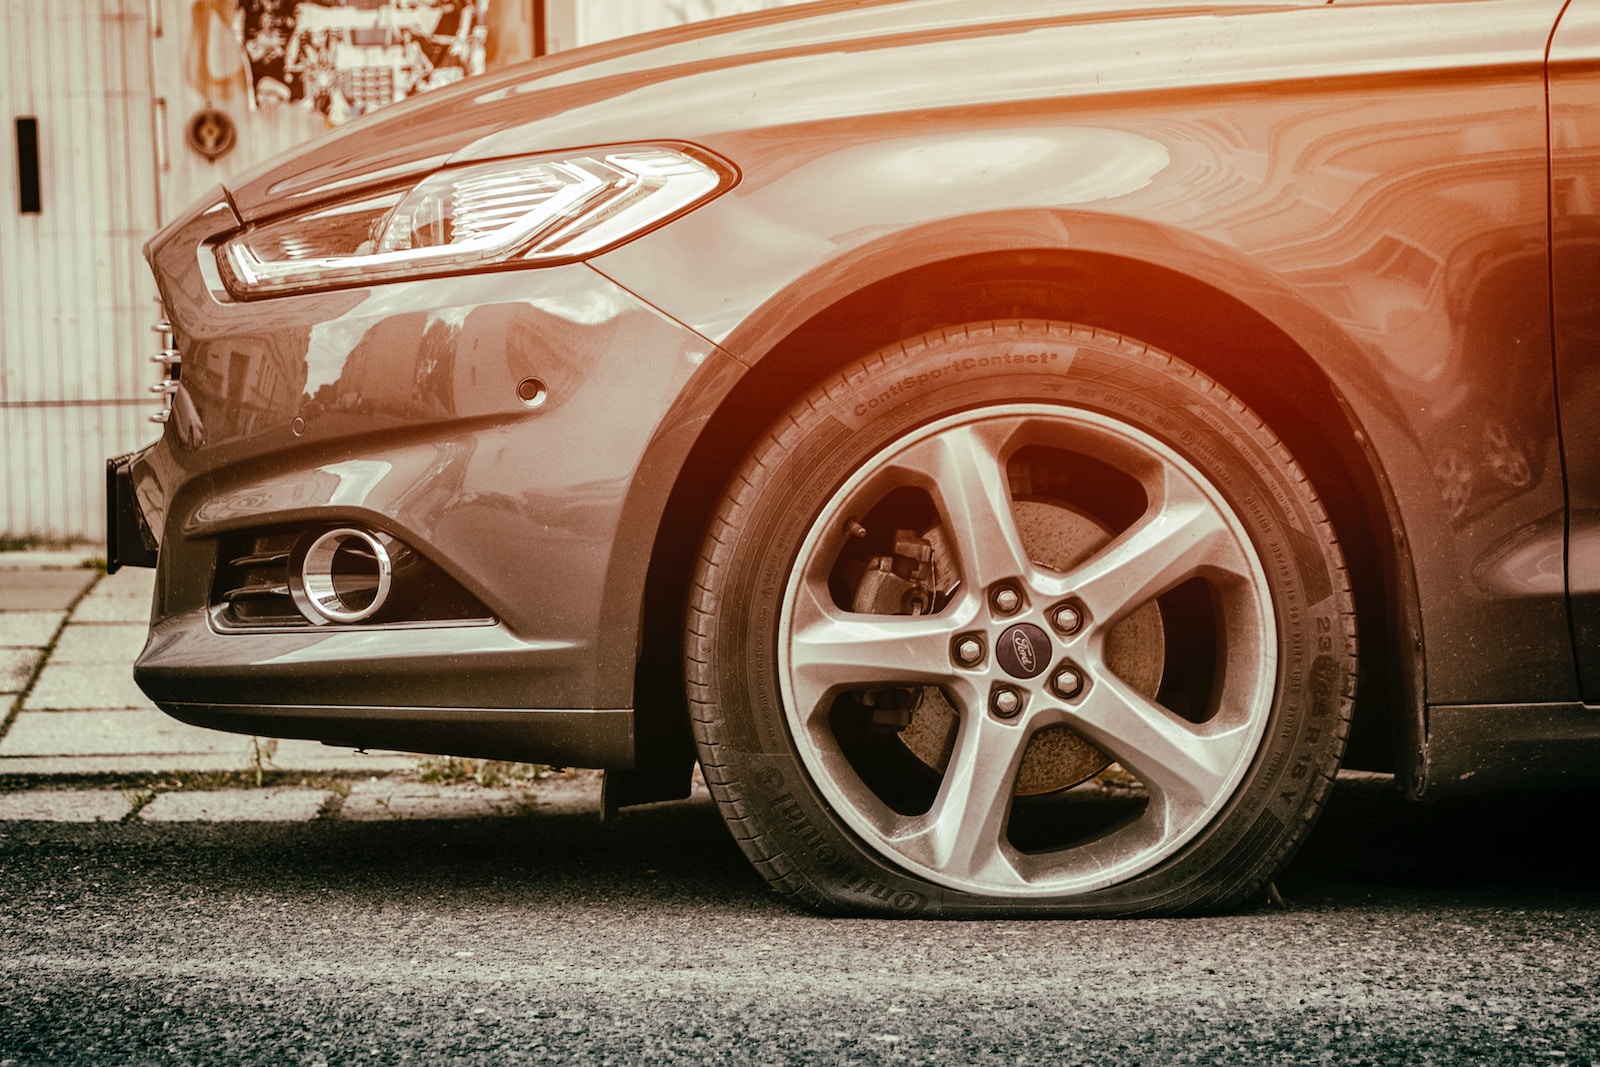 Benefits of Adding Roadside Assistance Coverage to Your Colorado Auto Insurance Policy